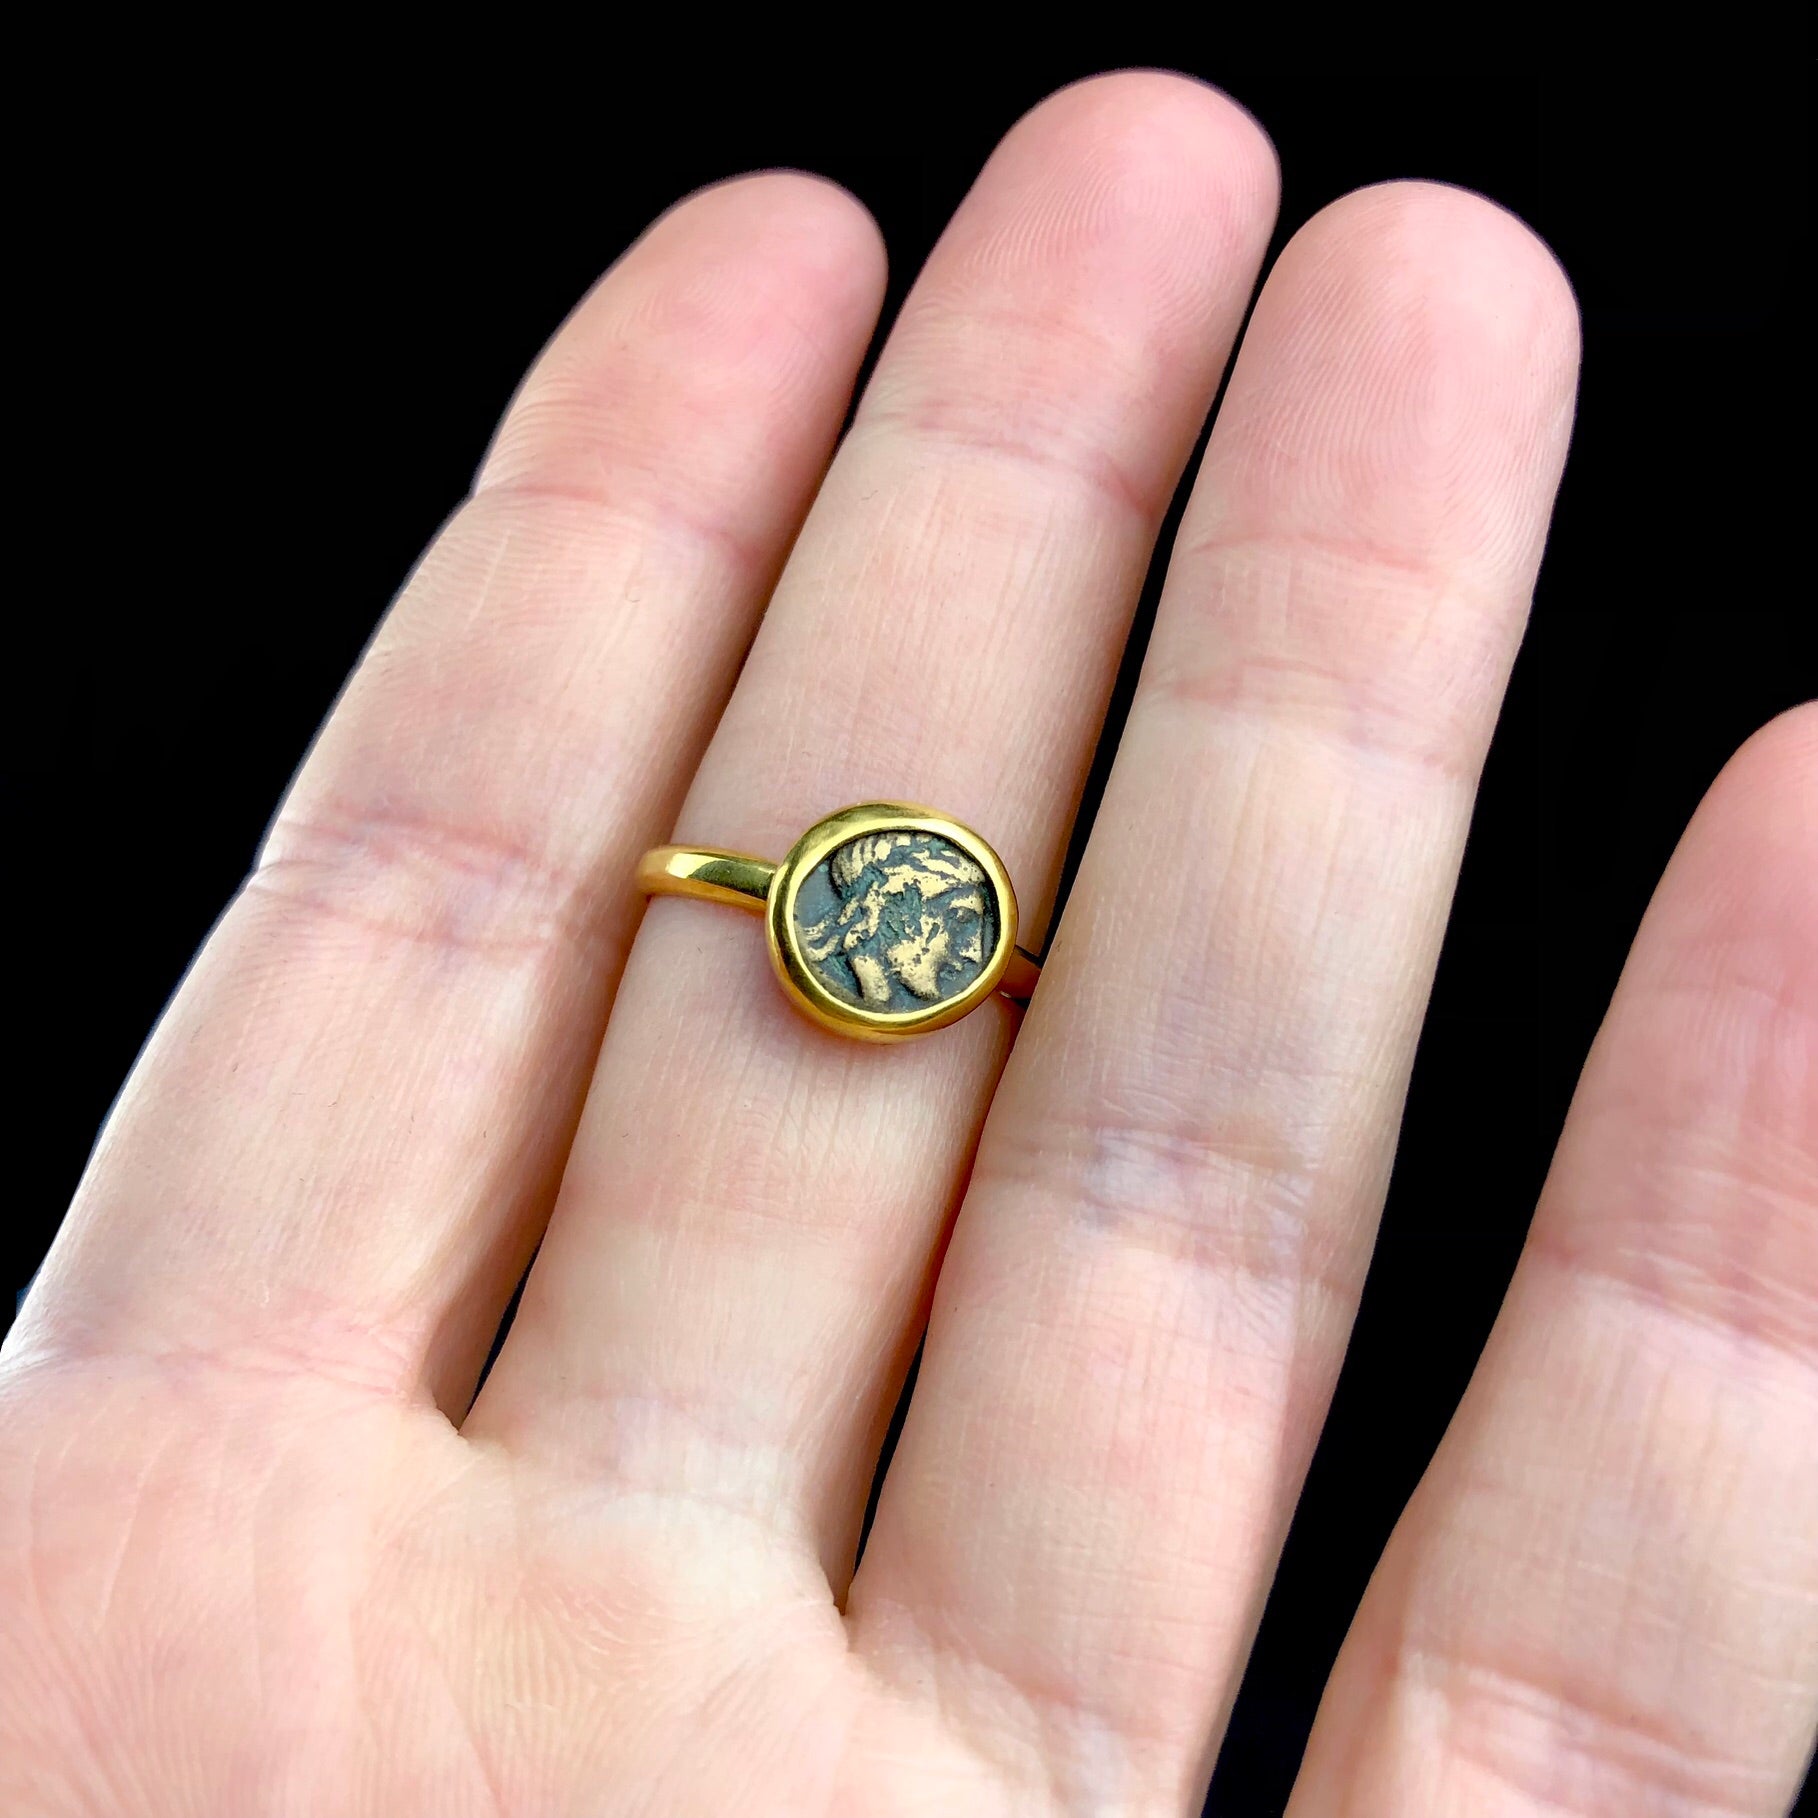 Ancient Greek Coin Ring shown in hand